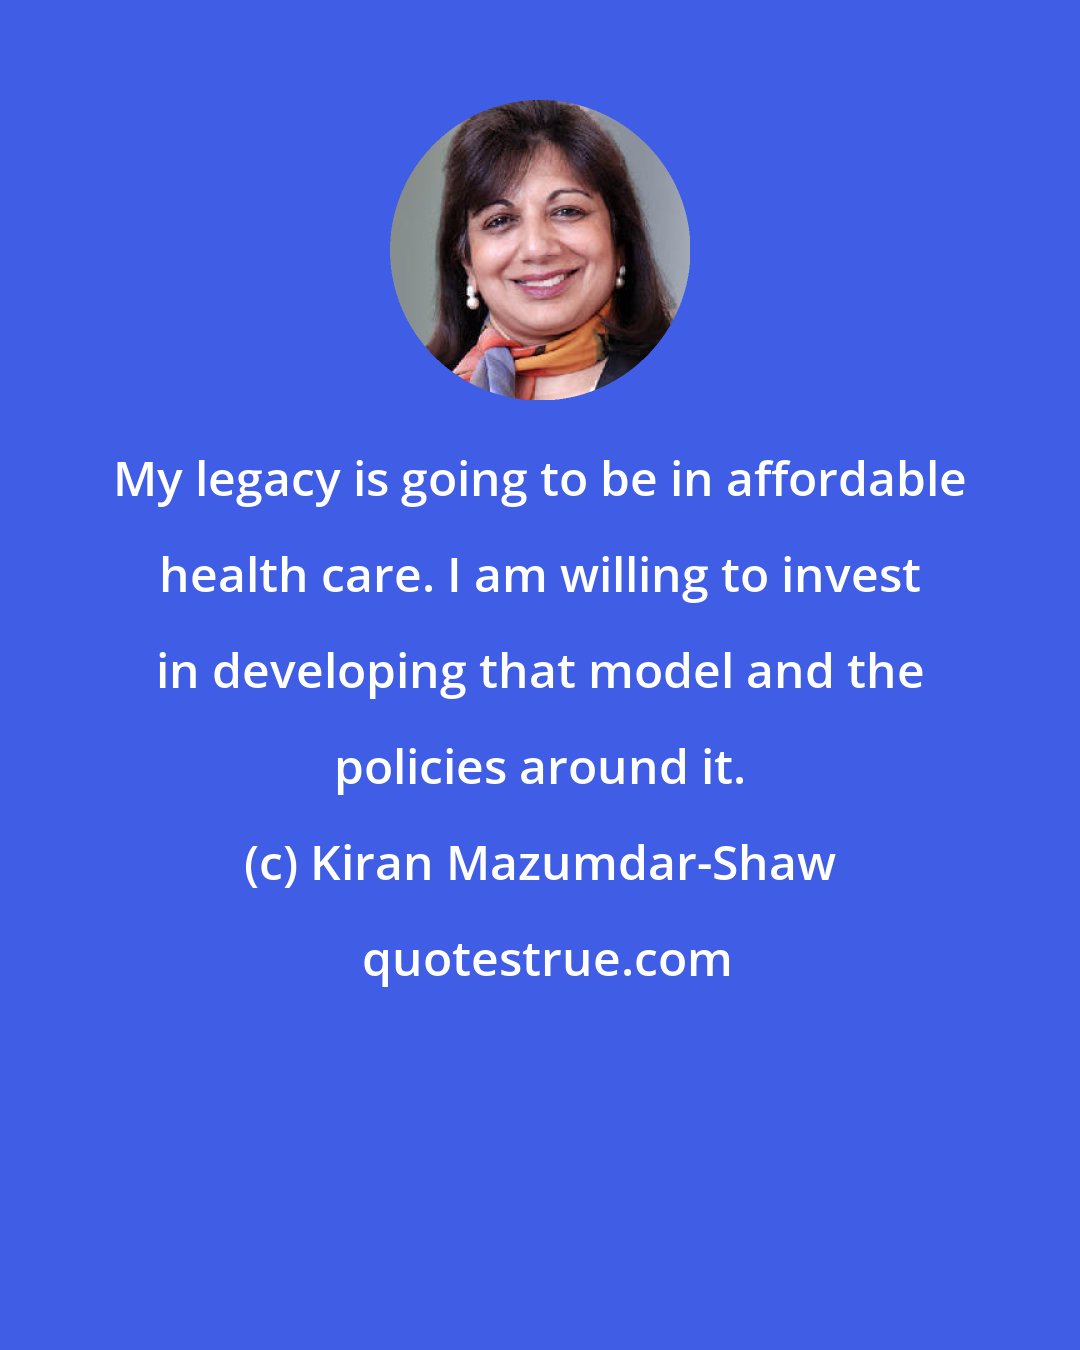 Kiran Mazumdar-Shaw: My legacy is going to be in affordable health care. I am willing to invest in developing that model and the policies around it.